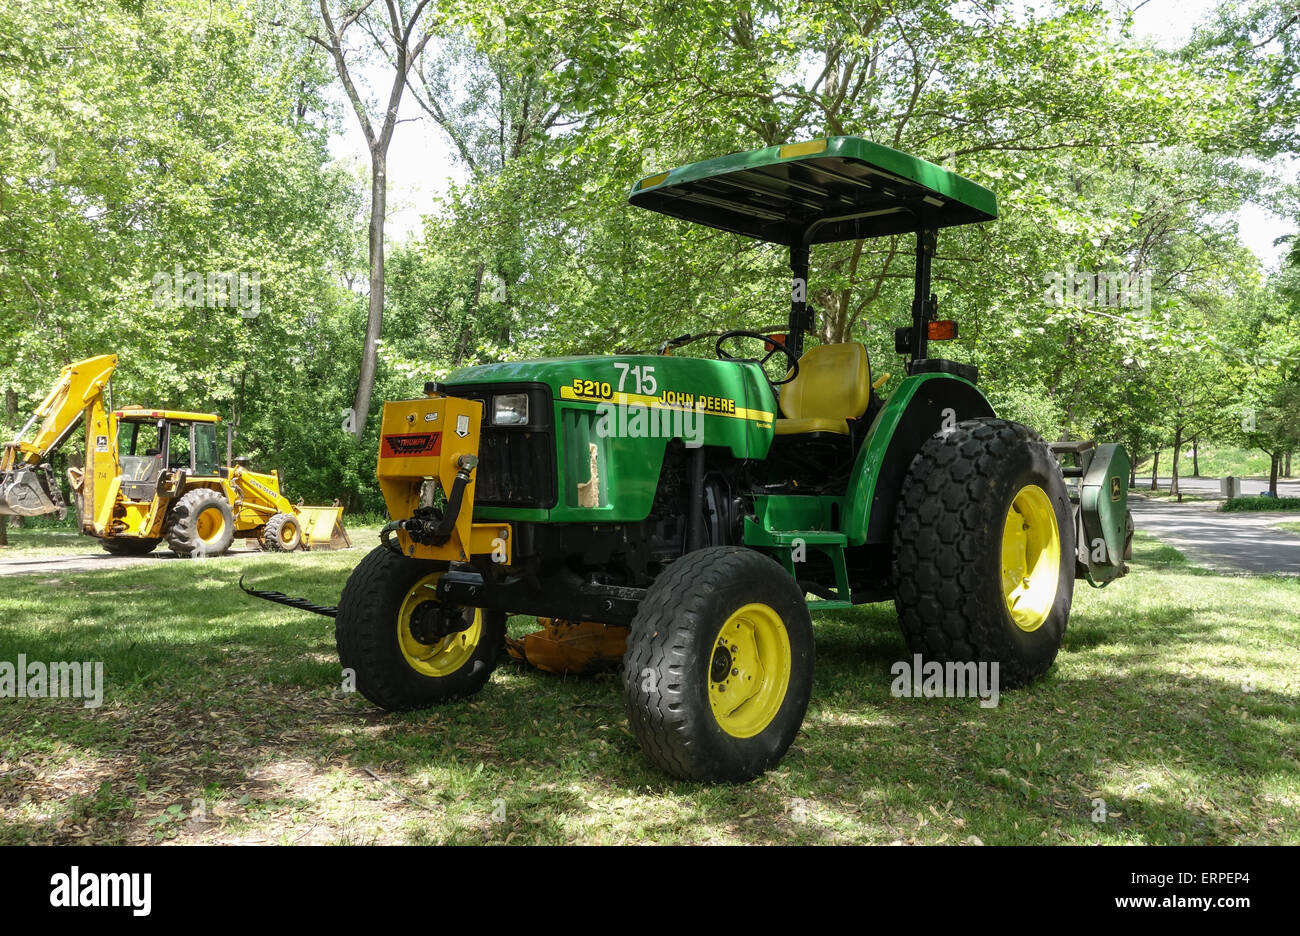 John deere tractor with cab and mower in park, USA. Stock Photo